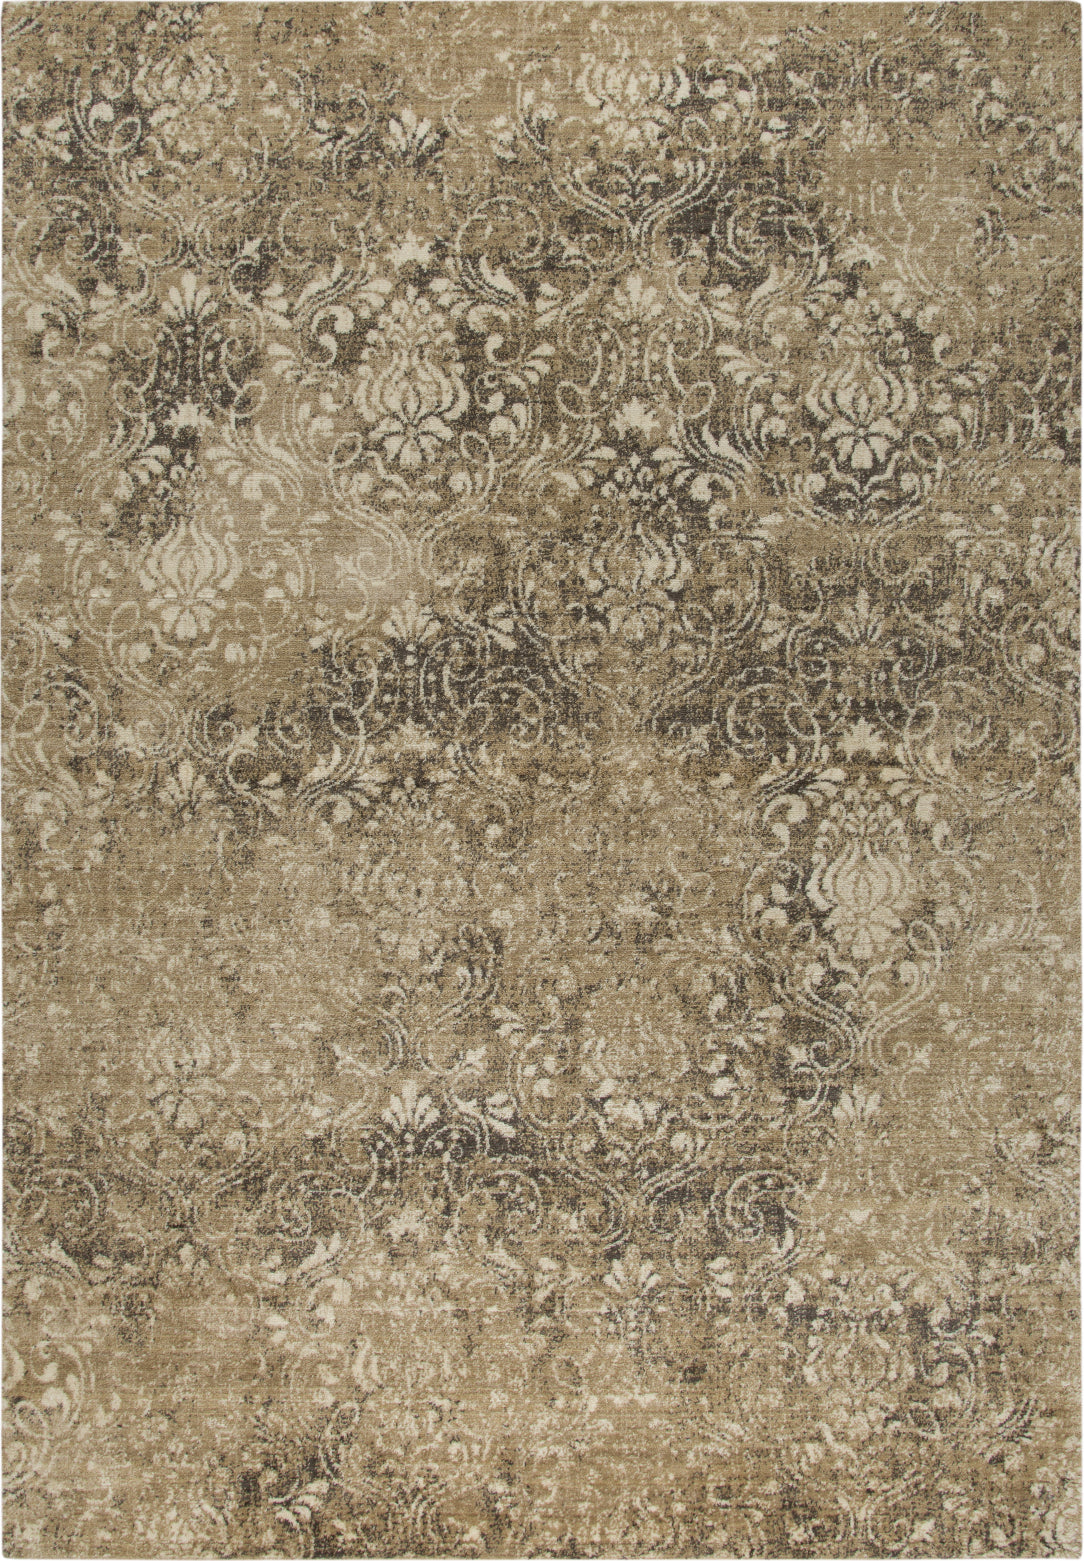 Rizzy Gossamer GS6781 Ivory Area Rug main image